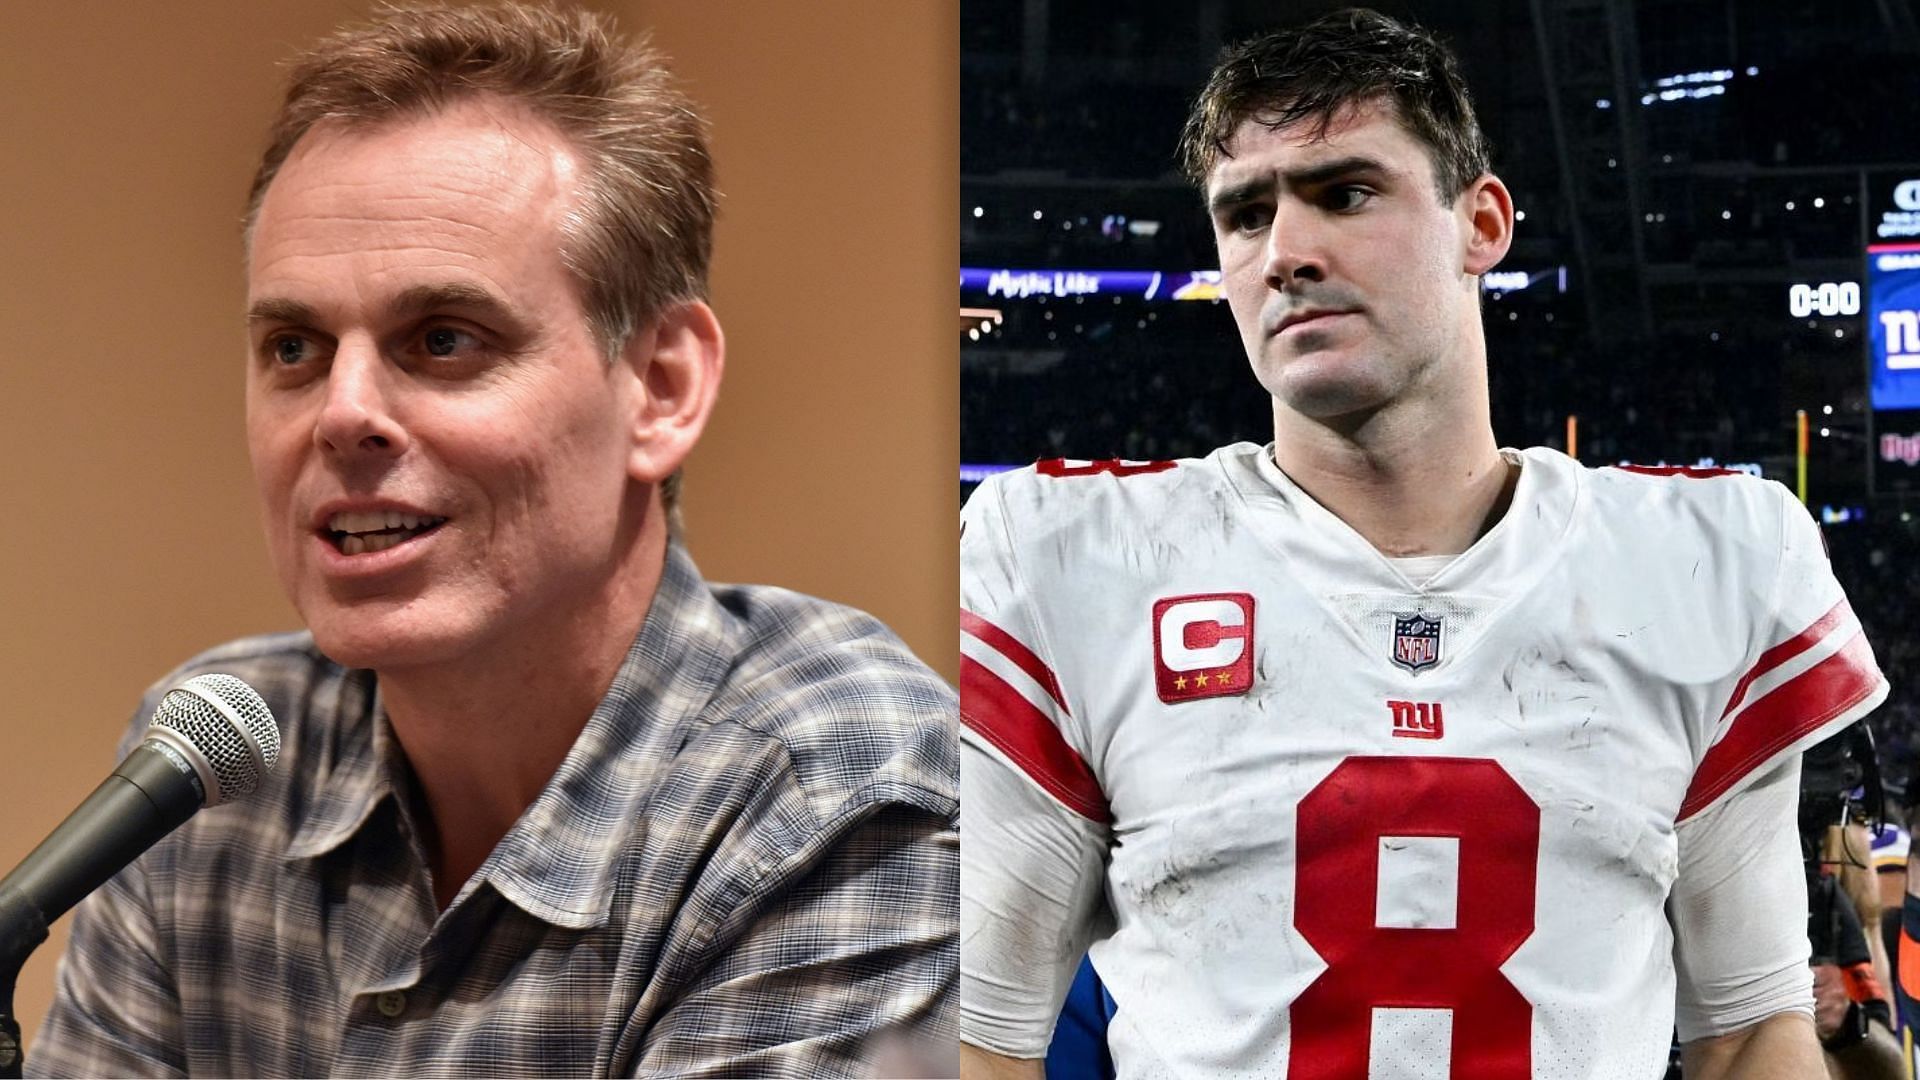 Sports media personality Colin Cowherd shared that Daniel Jones and the New York Giants offense were completely overwhelmed by the Dallas Cowboys defense. (Image credit: Amy E. Price/Getty Images)